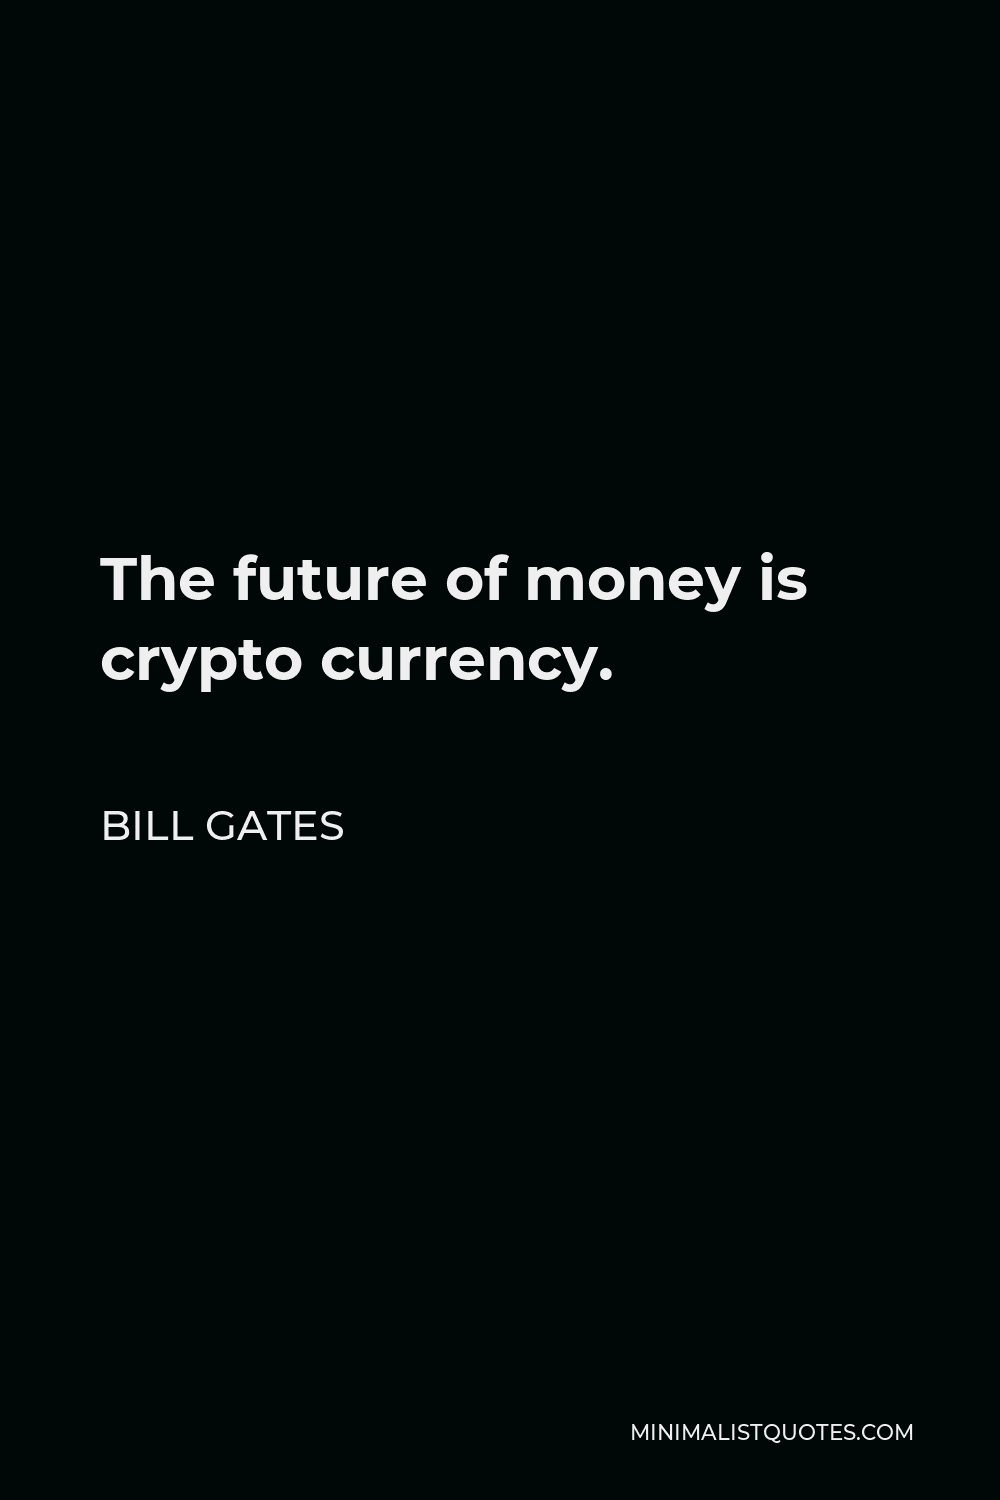 Bill Gates Quote - The future of money is crypto currency.